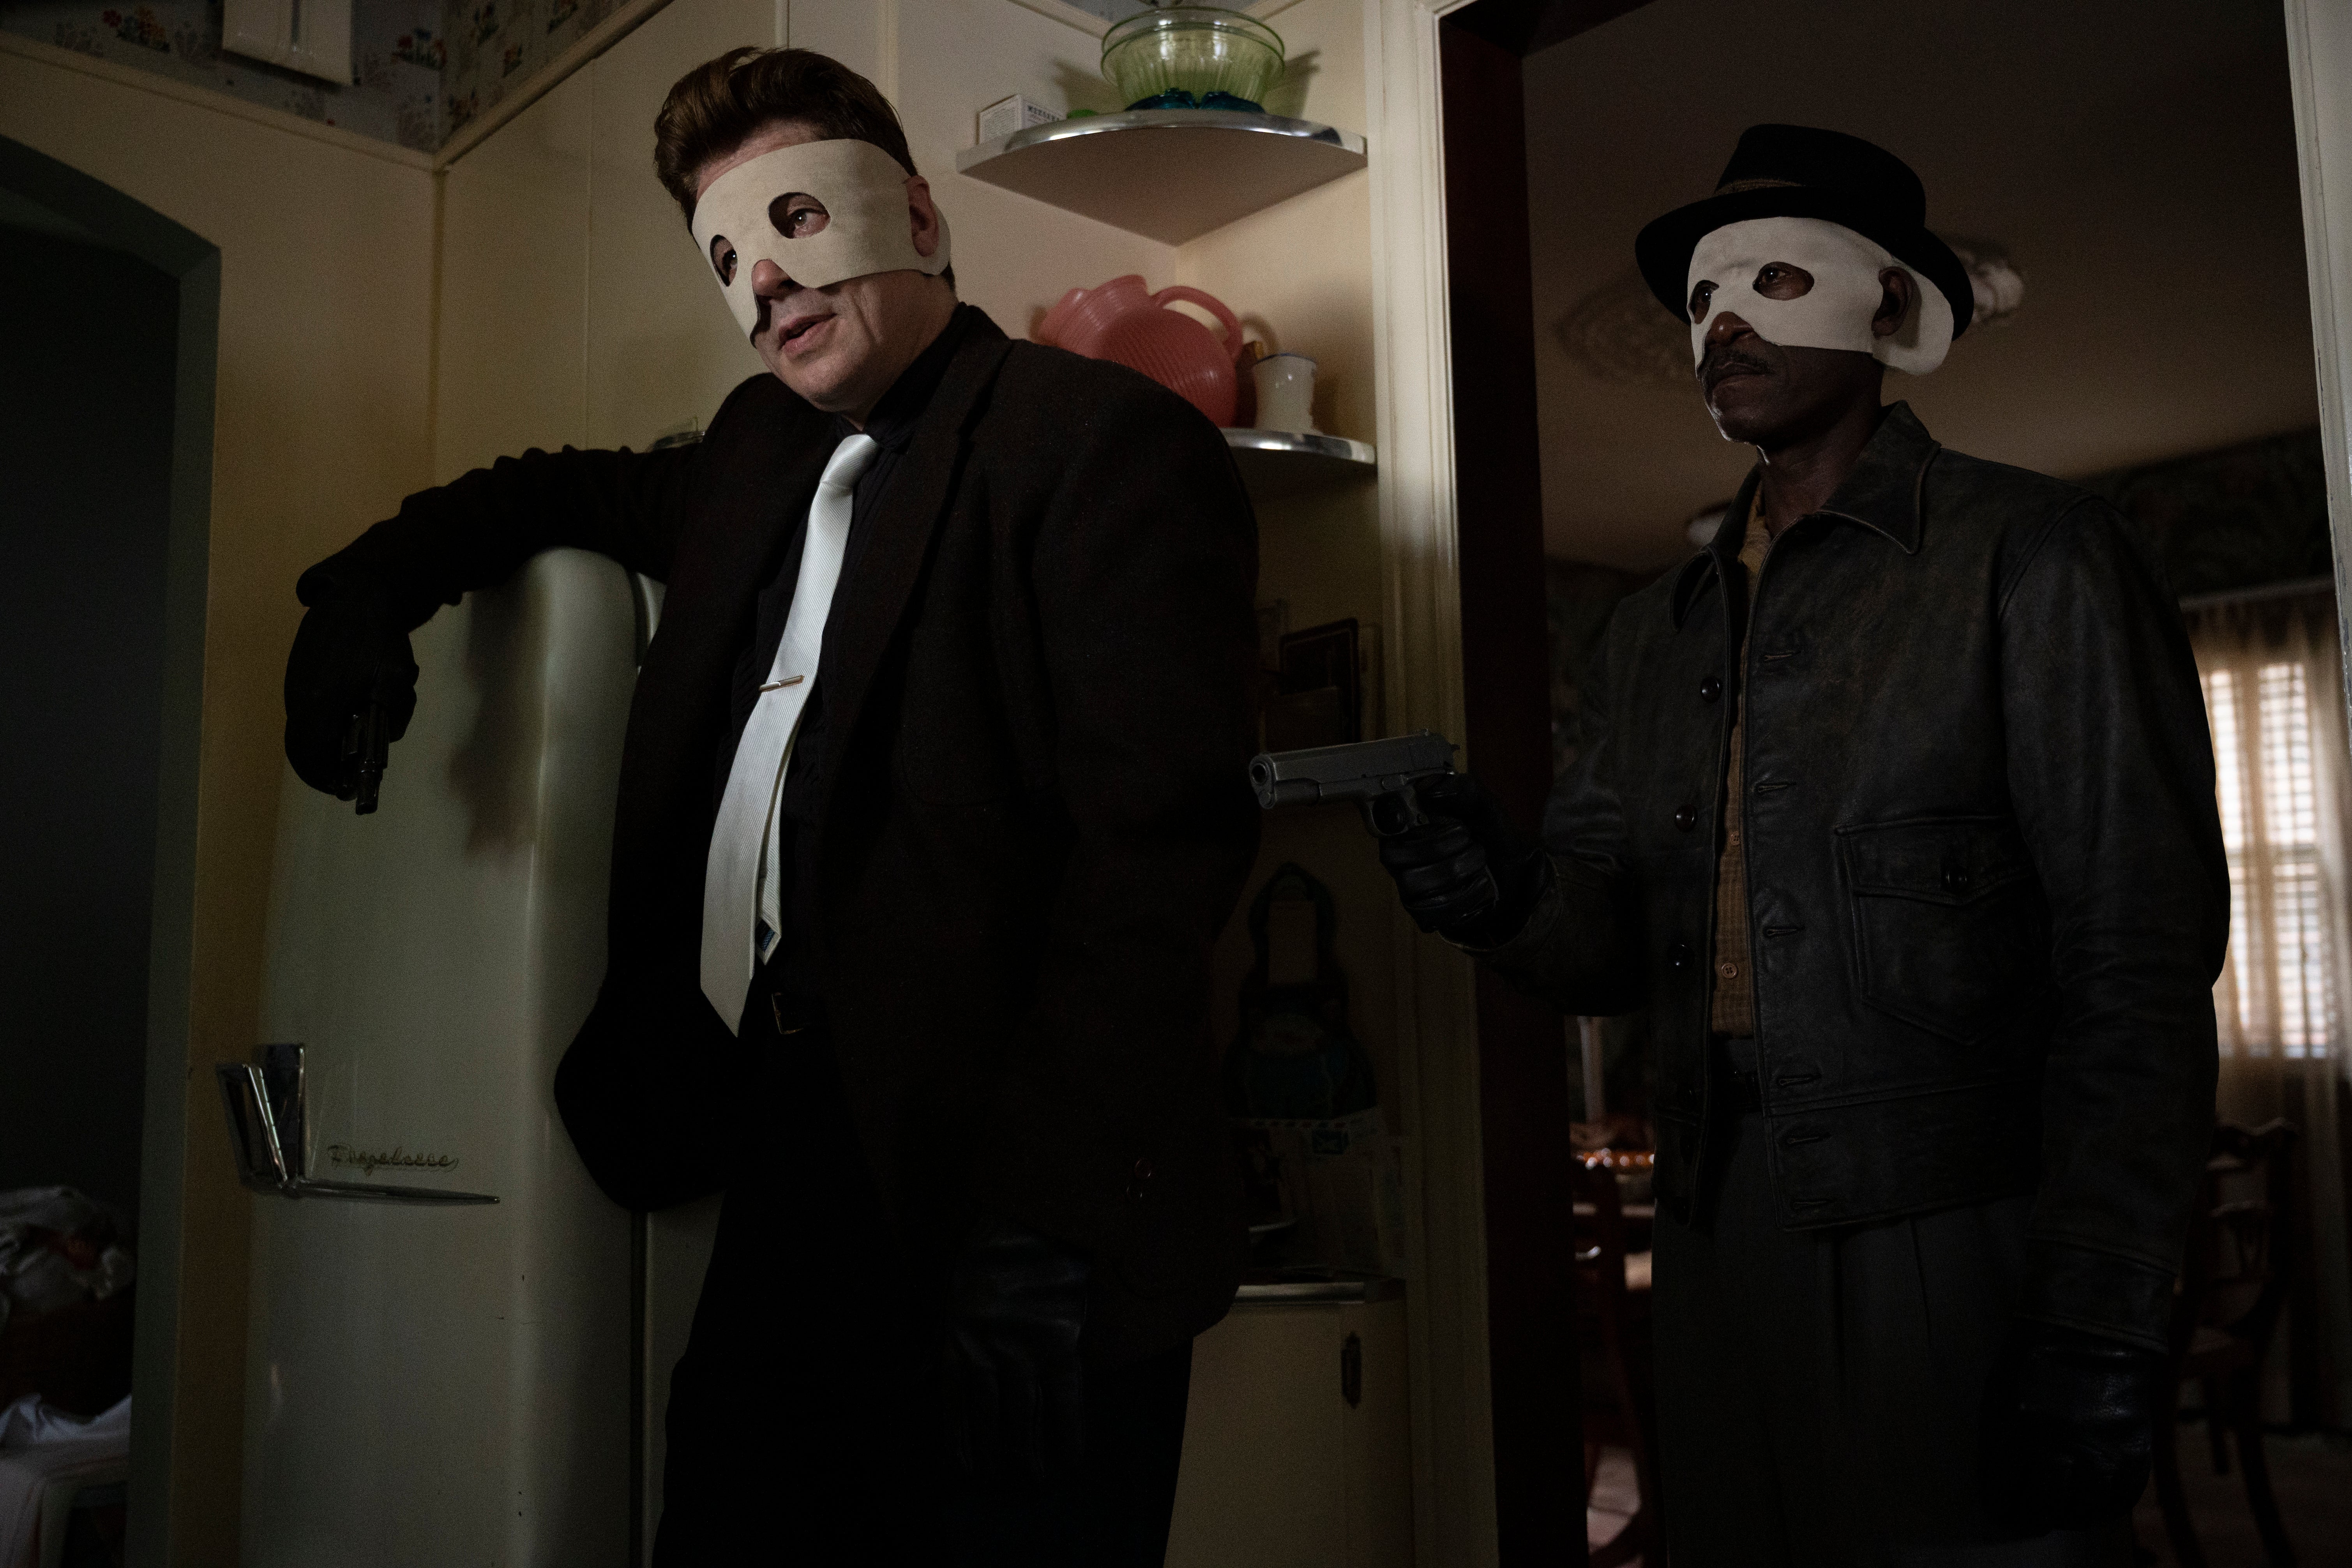 The two actors wear crude white masks and 1950s clothes in a 1950s kitchen